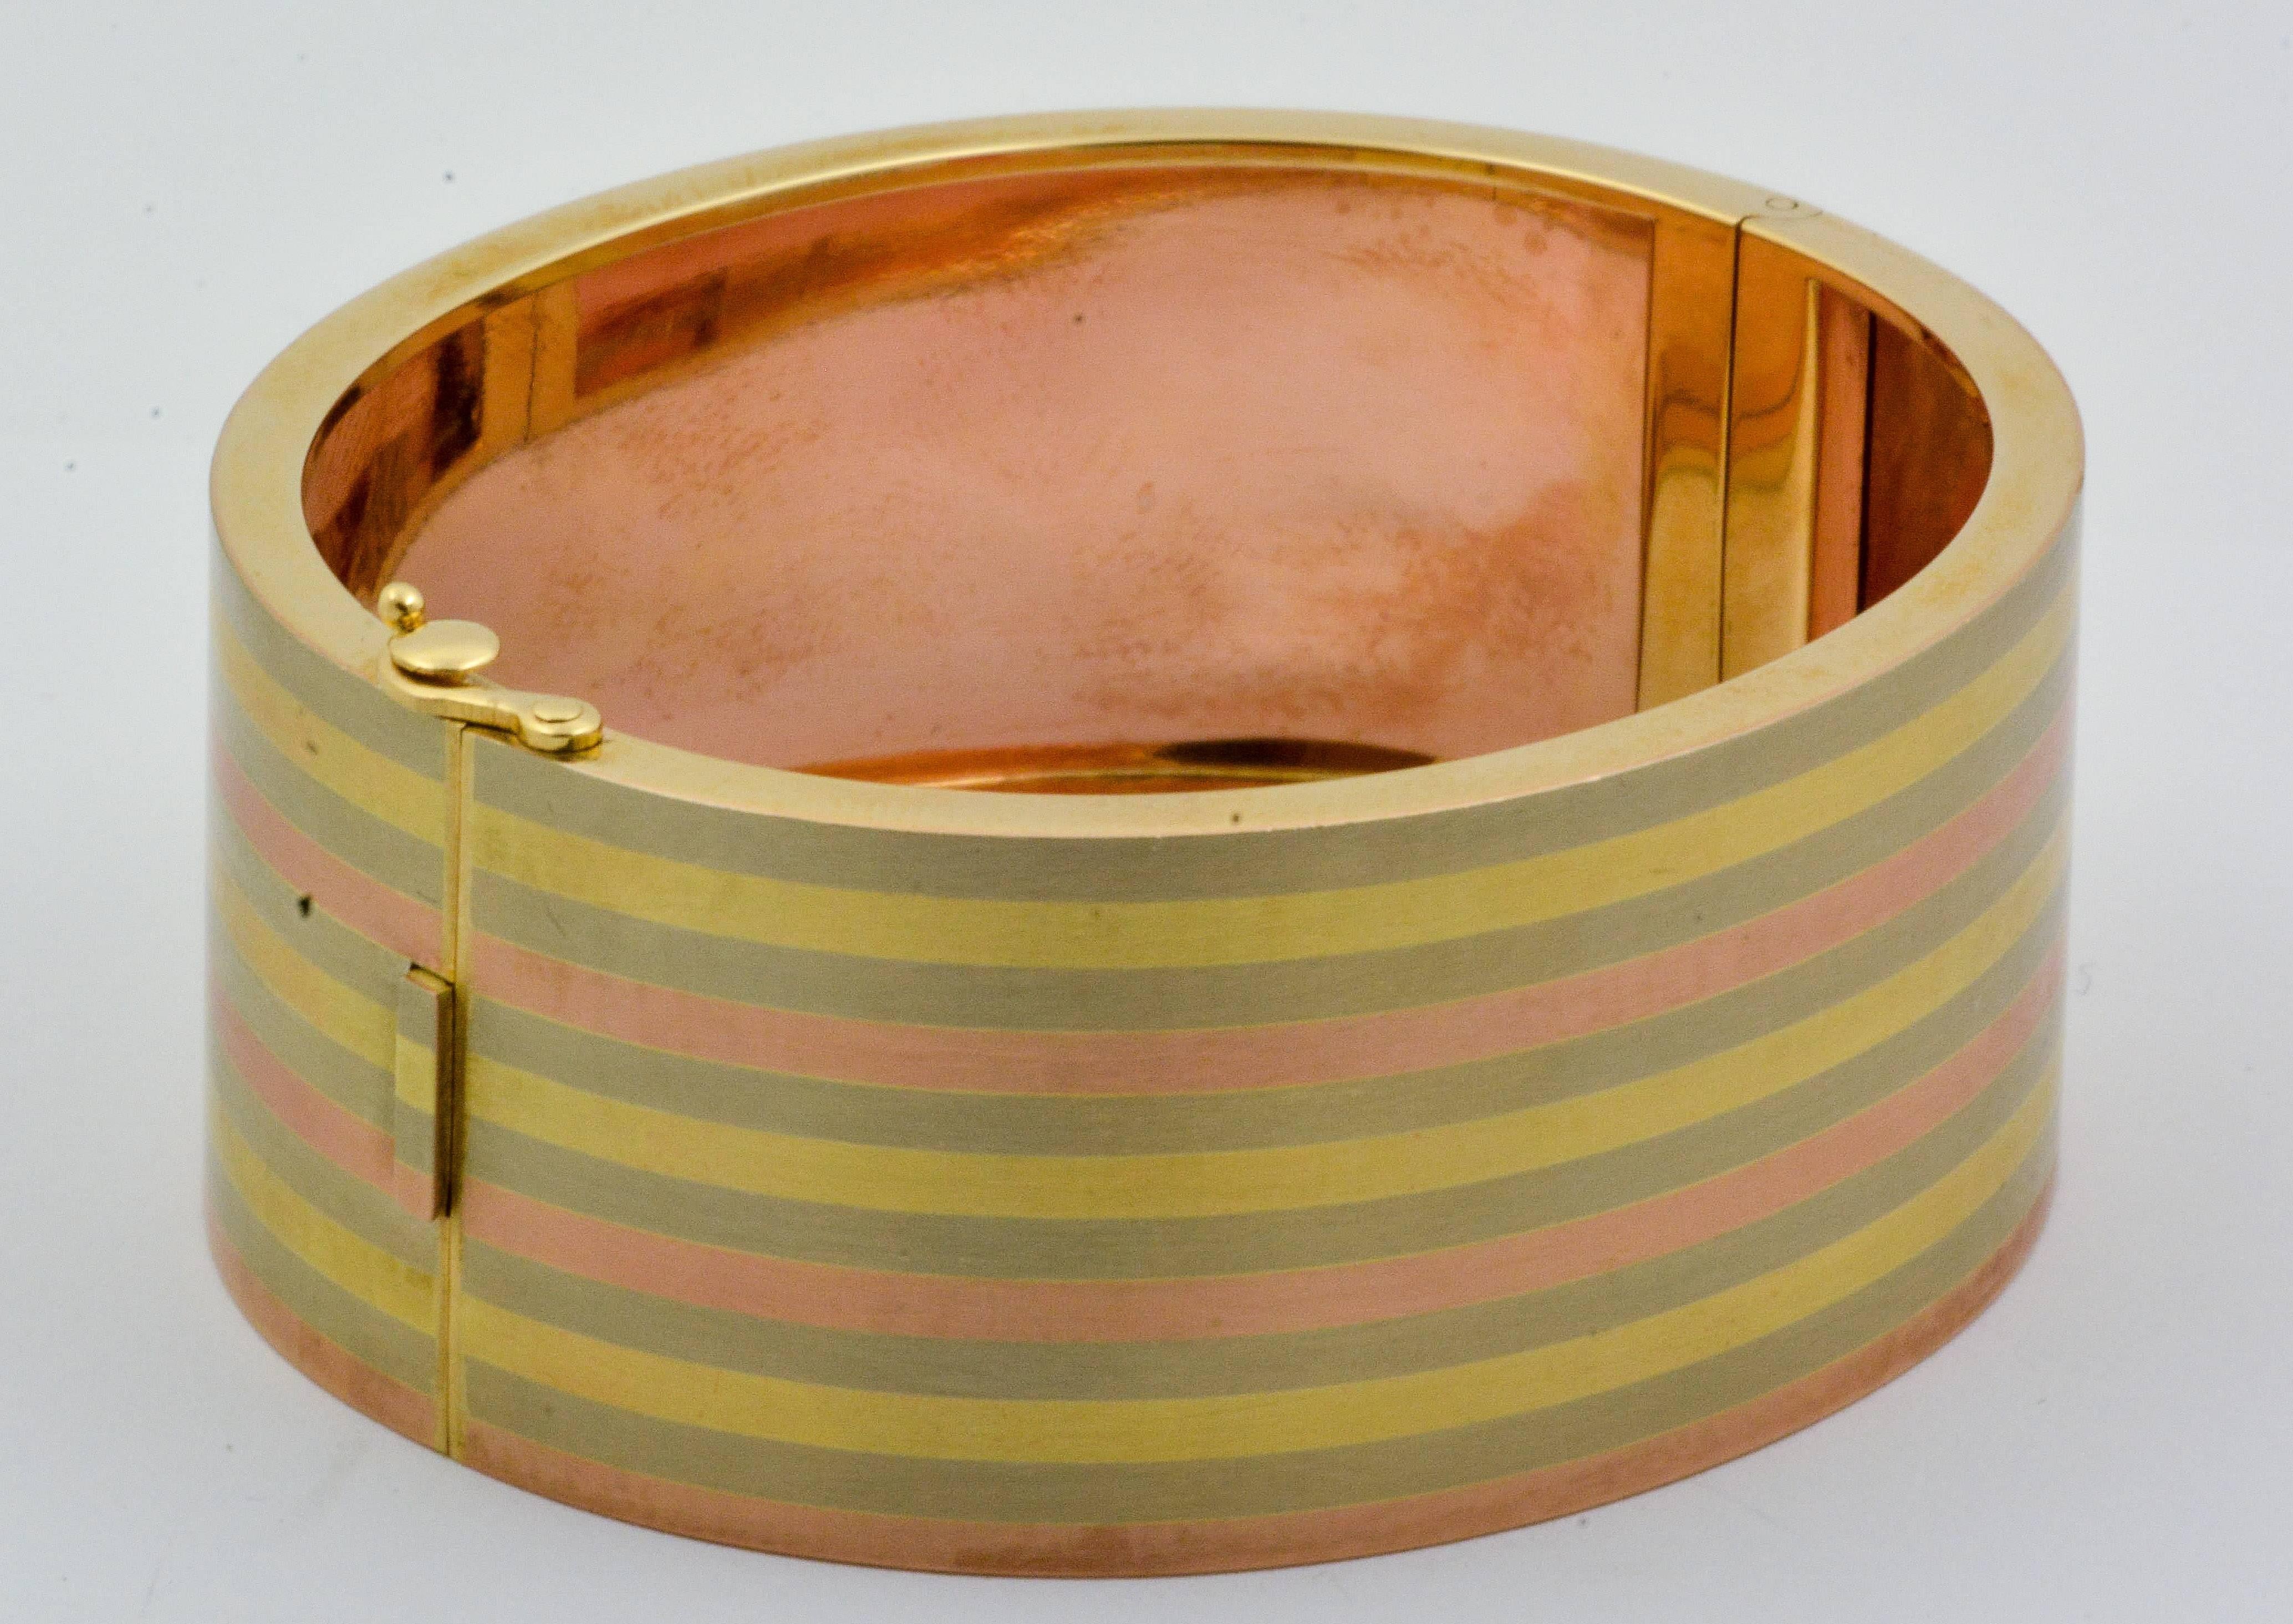 This beautiful hinged bangle bracelet makes a fashion statement with its unique 14kt stripes of yellow, rose, and white gold. Its entire surface is satin finished and flat across its 25.3mm width. The bangle features a hidden hinge to keep its